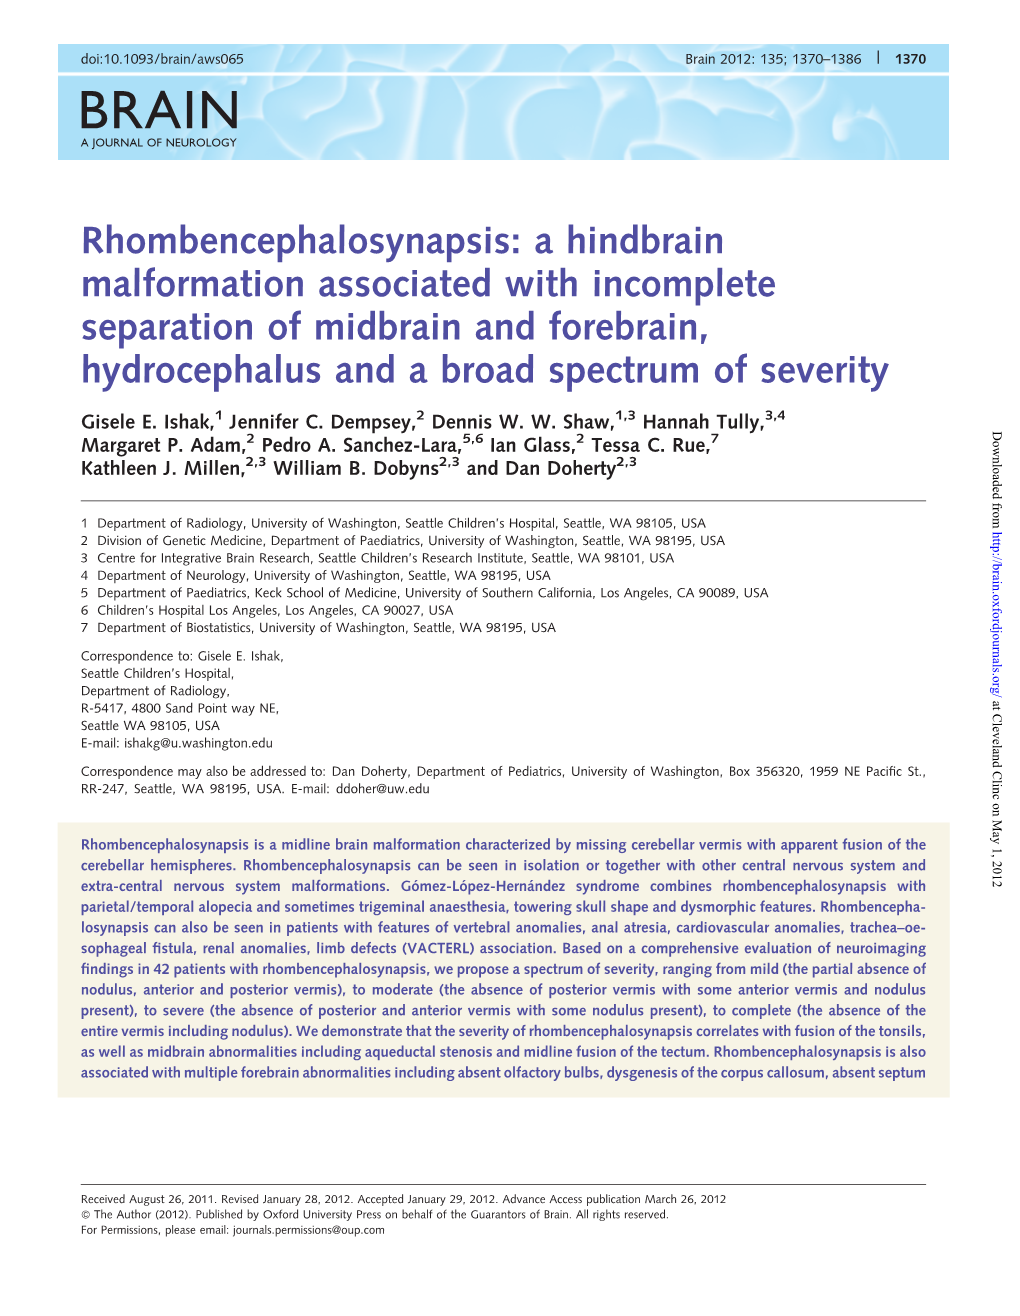 Rhombencephalosynapsis: a Hindbrain Malformation Associated with Incomplete Separation of Midbrain and Forebrain, Hydrocephalus and a Broad Spectrum of Severity